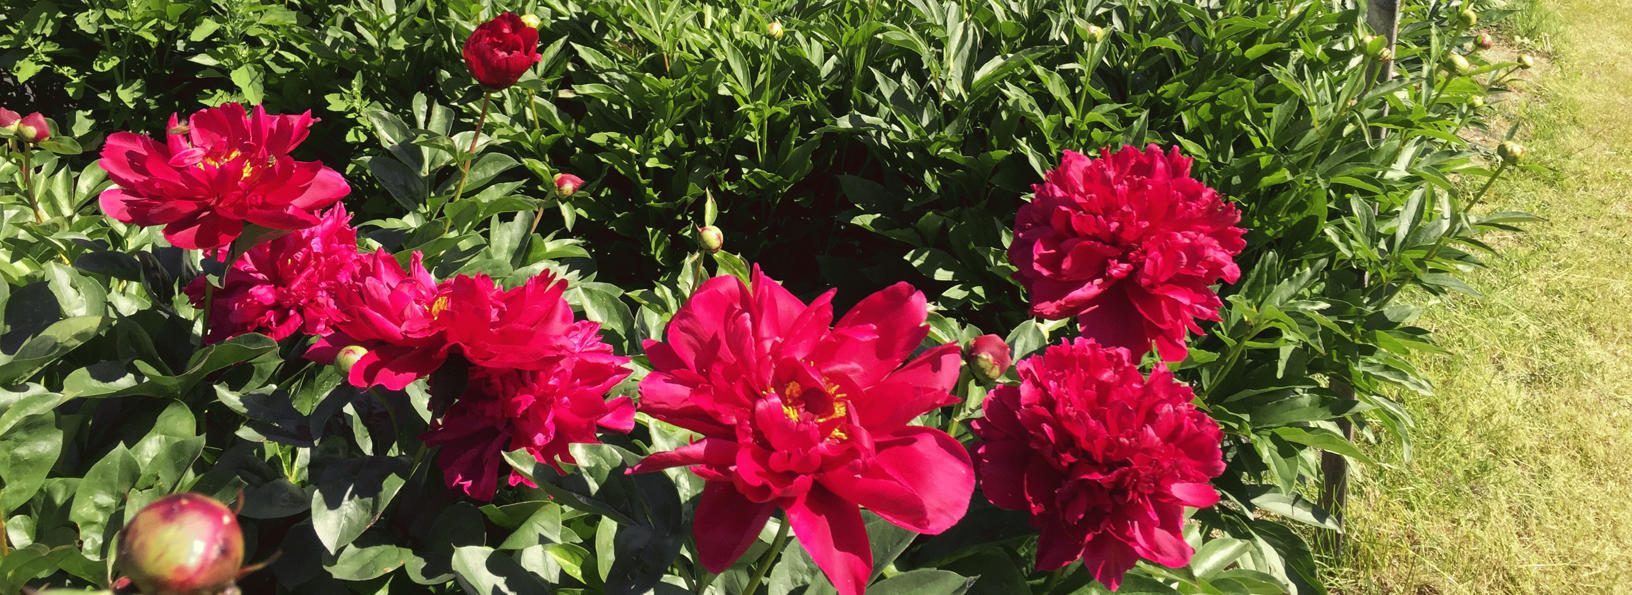 Insect Integrated Pest Management Strategies for Peony Production